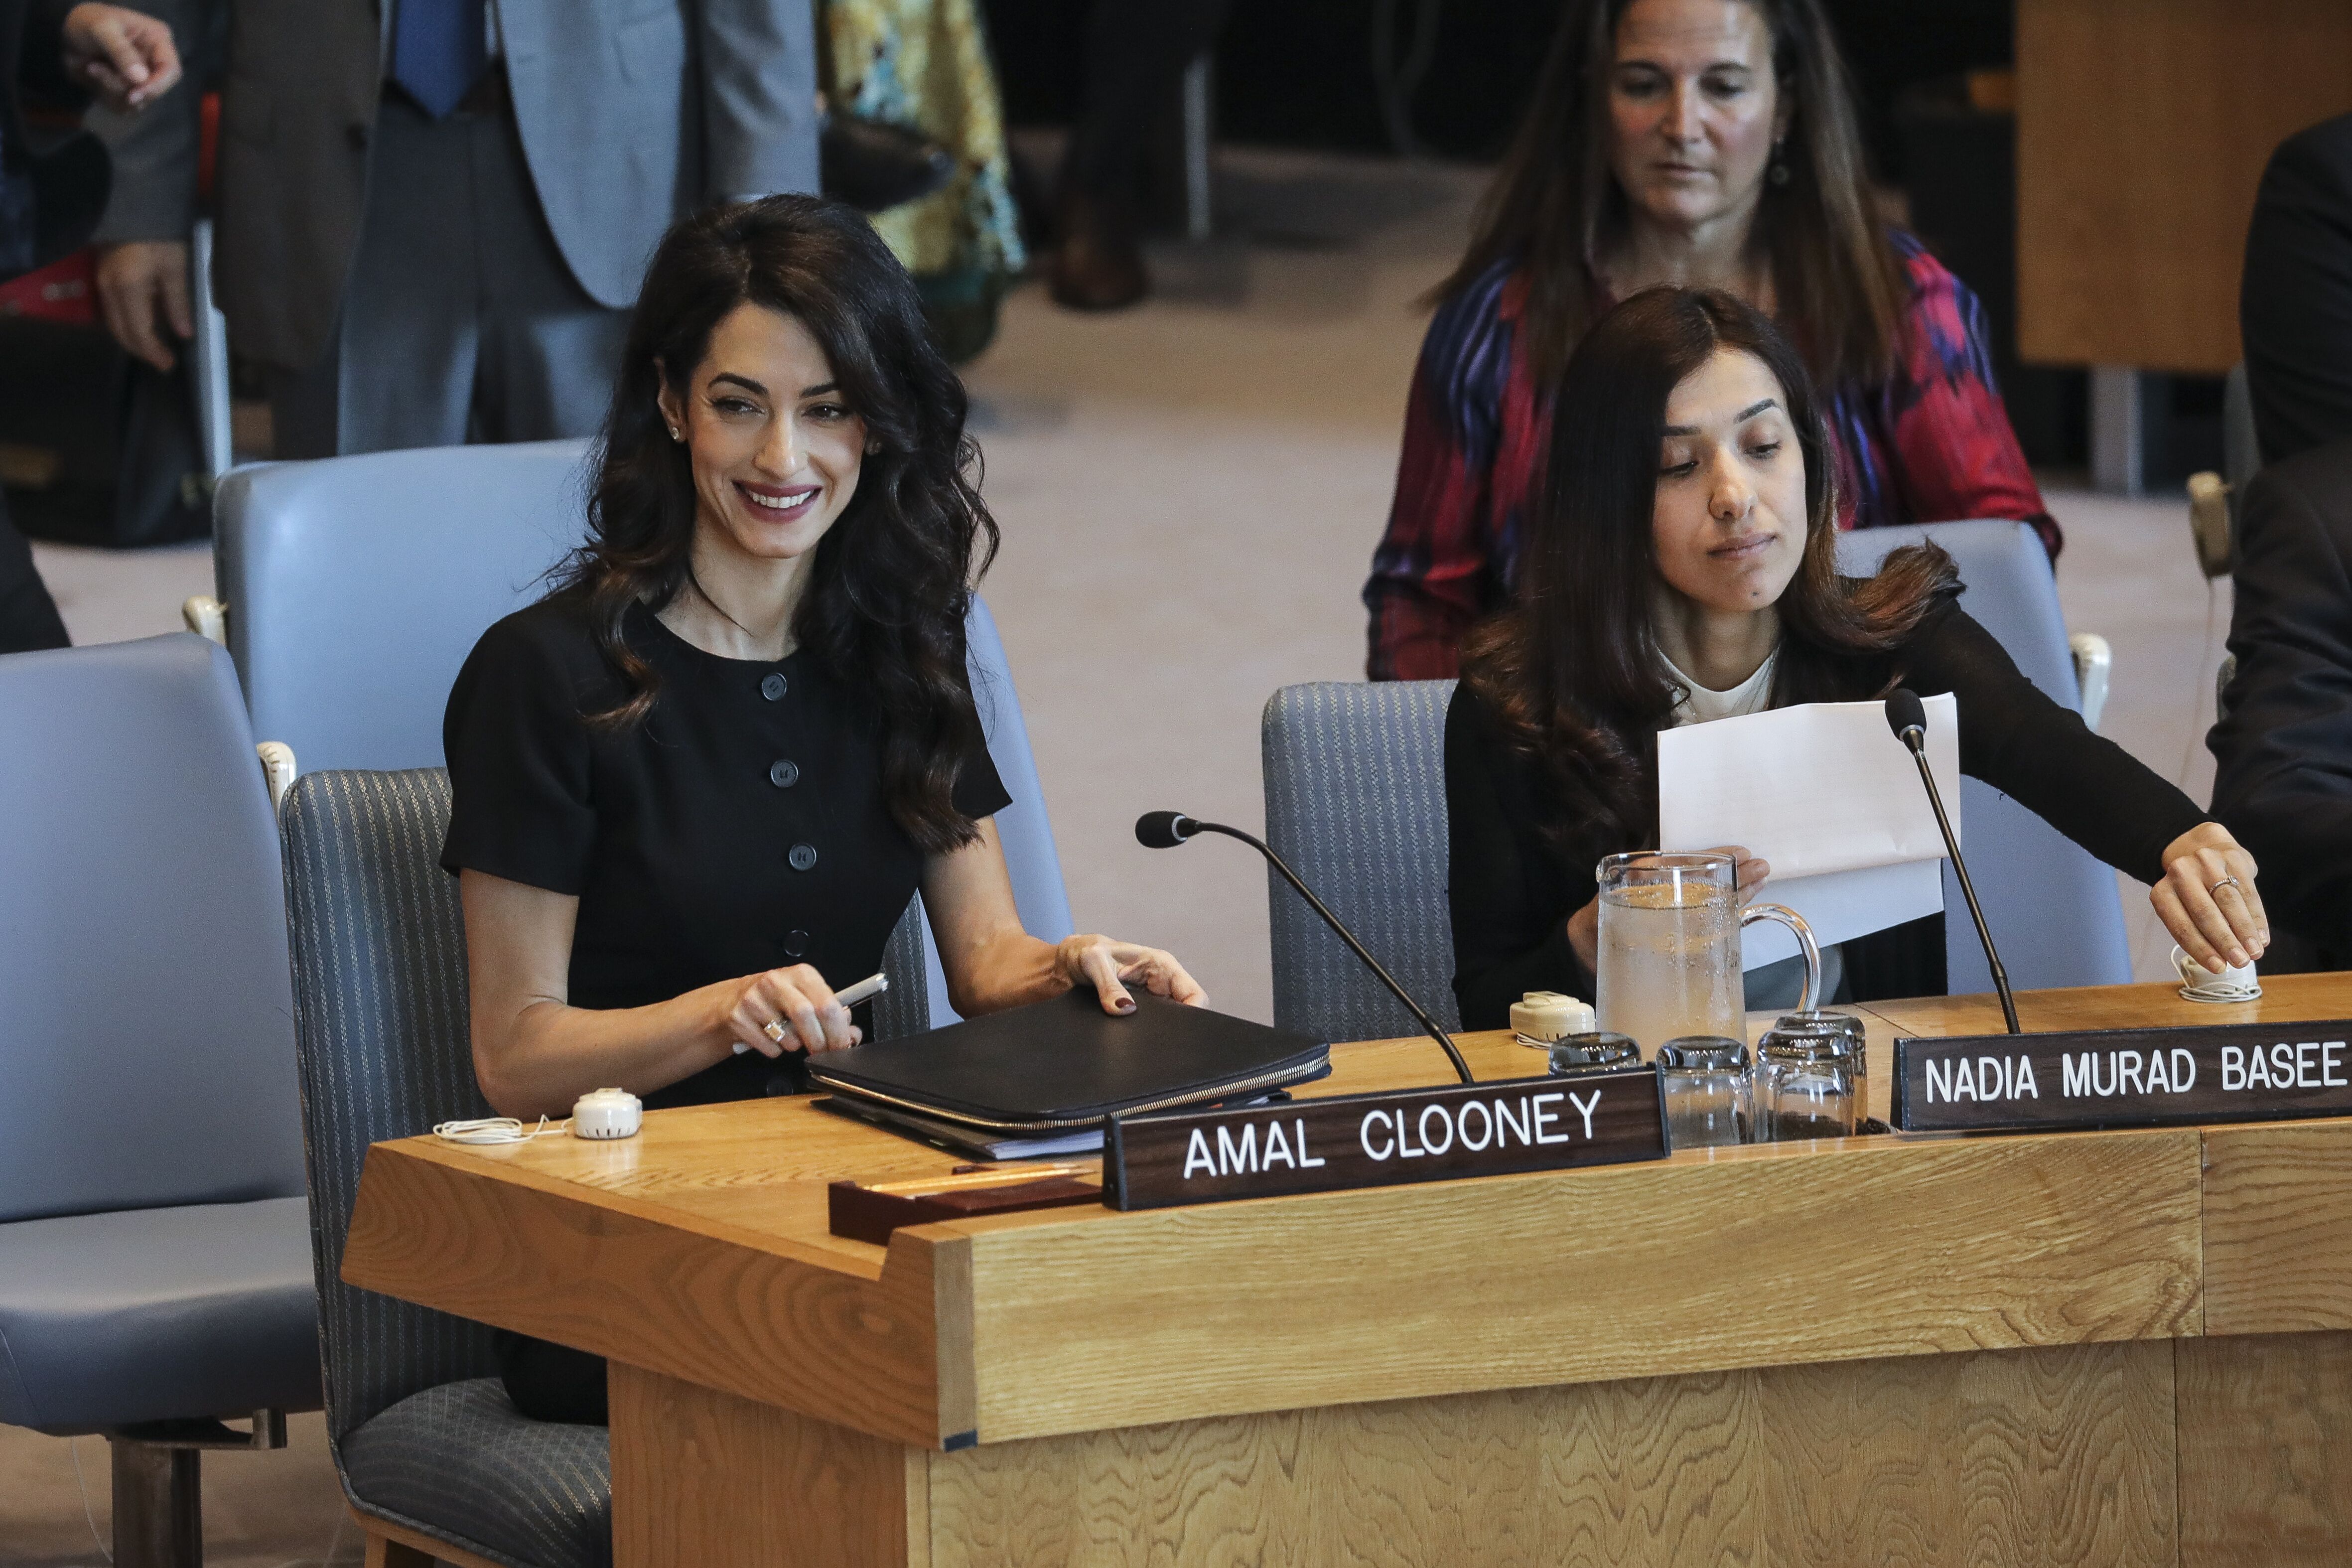  Amal Clooney and Iraqi human rights activist Nadia Murad Basee Taha attend a United Nations Security Council meeting at U.N. headquarters in 2019 in New York | Source: Getty Images